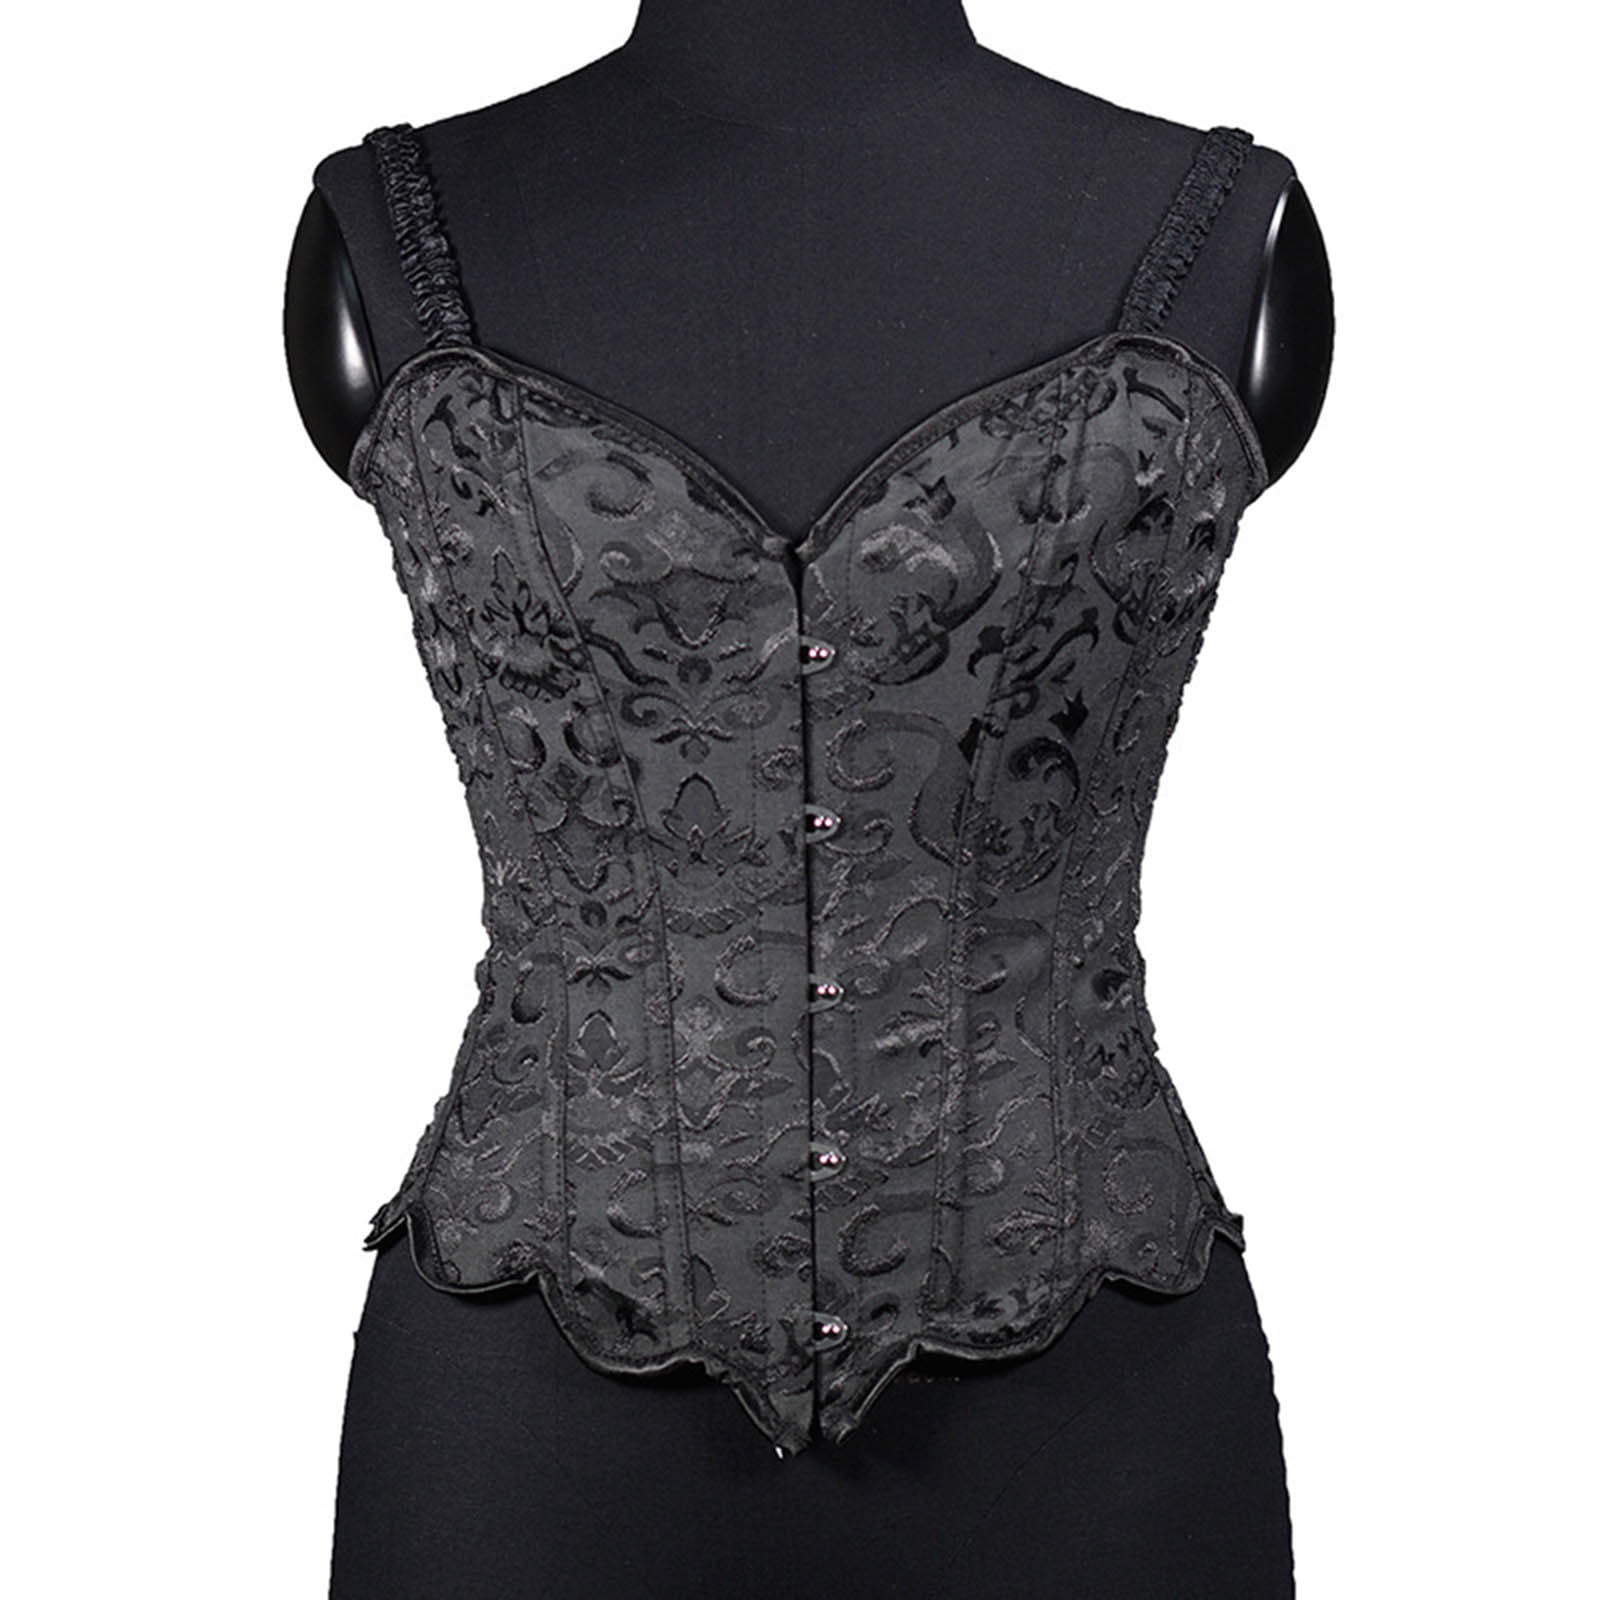 ASYOU under bust corset top in black